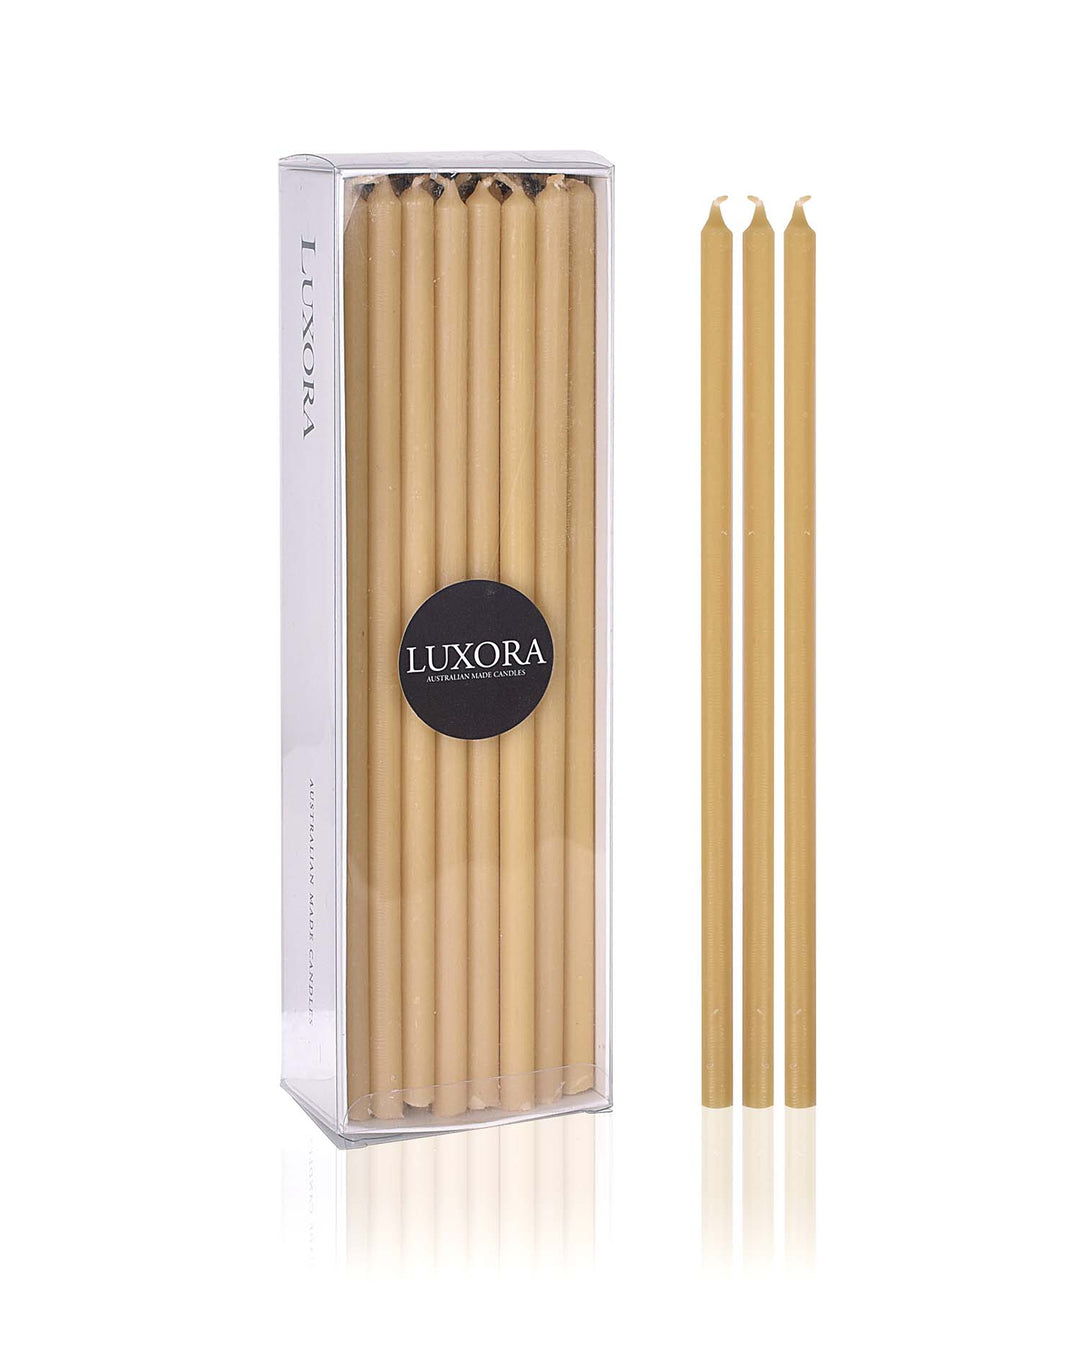 7mm x 220mm Pure Beeswax Candle (50pcs)